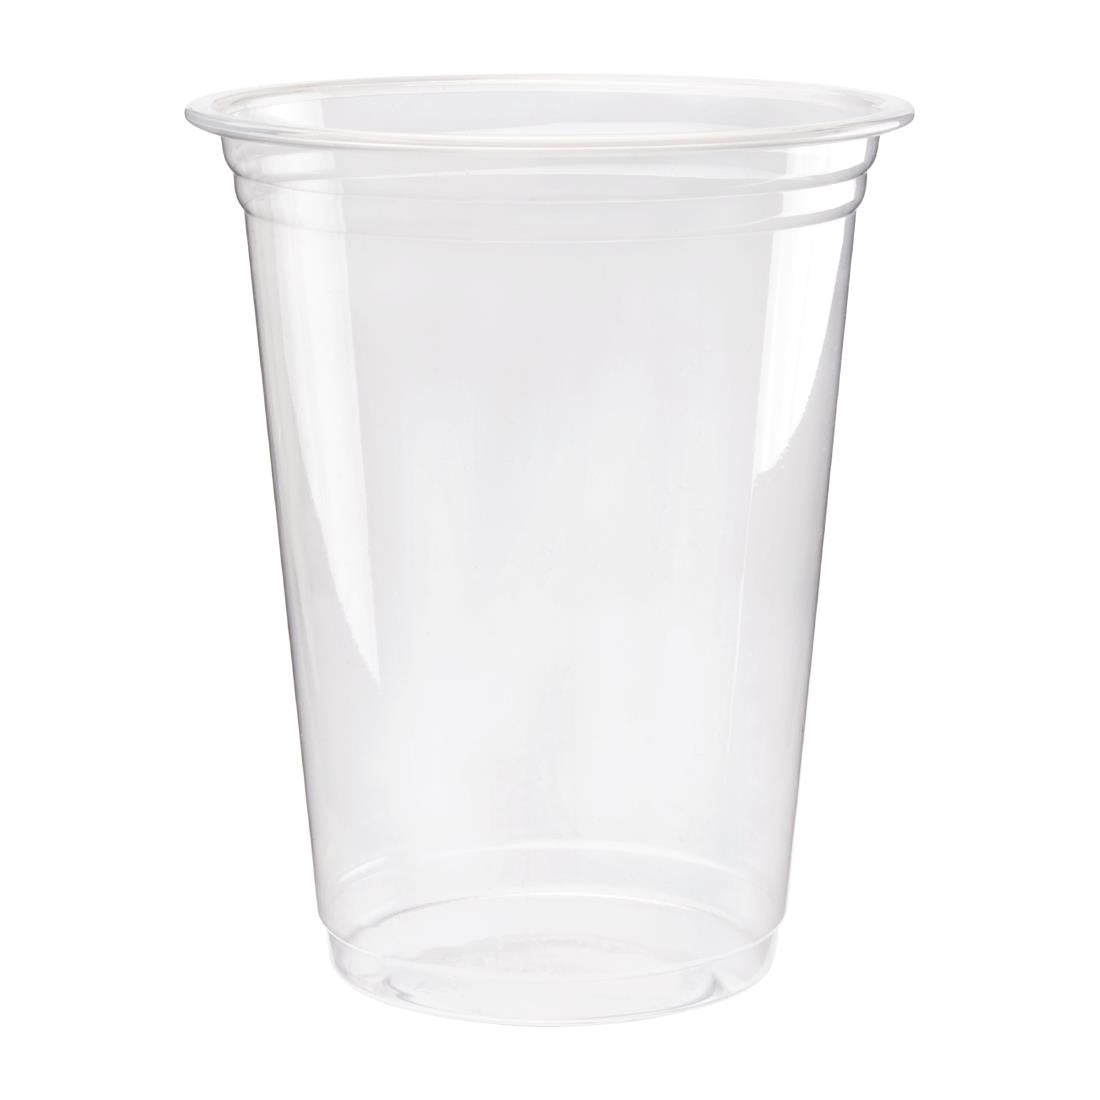 FA343 Fiesta Compostable PLA Cold Cups 454ml / 16oz (Pack of 1000) JD Catering Equipment Solutions Ltd